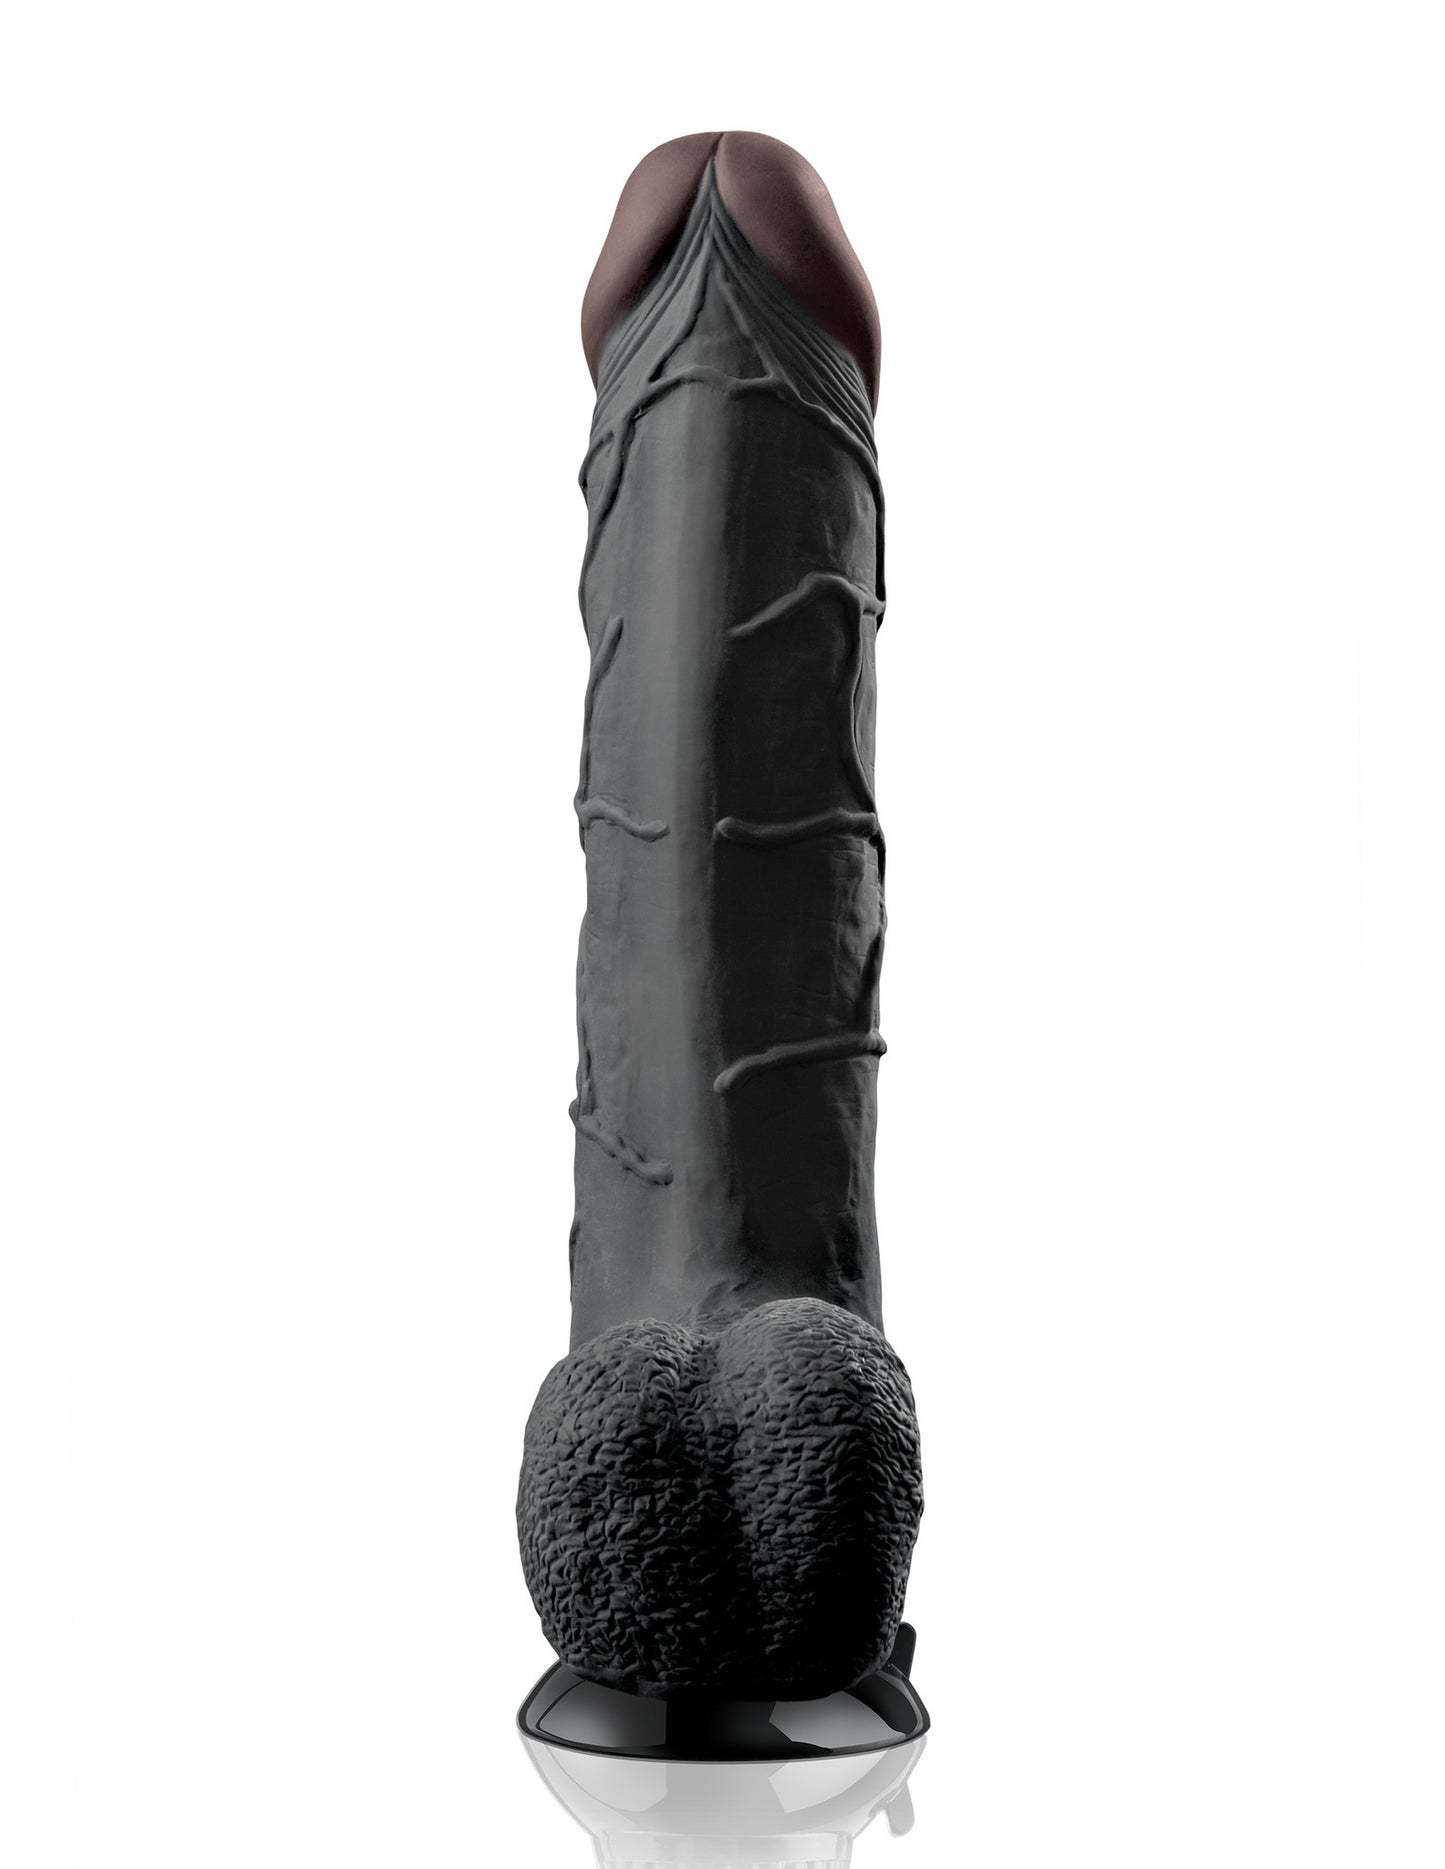 Real Feel Deluxe No. 11 Vibrating 11" Dildo  - Club X